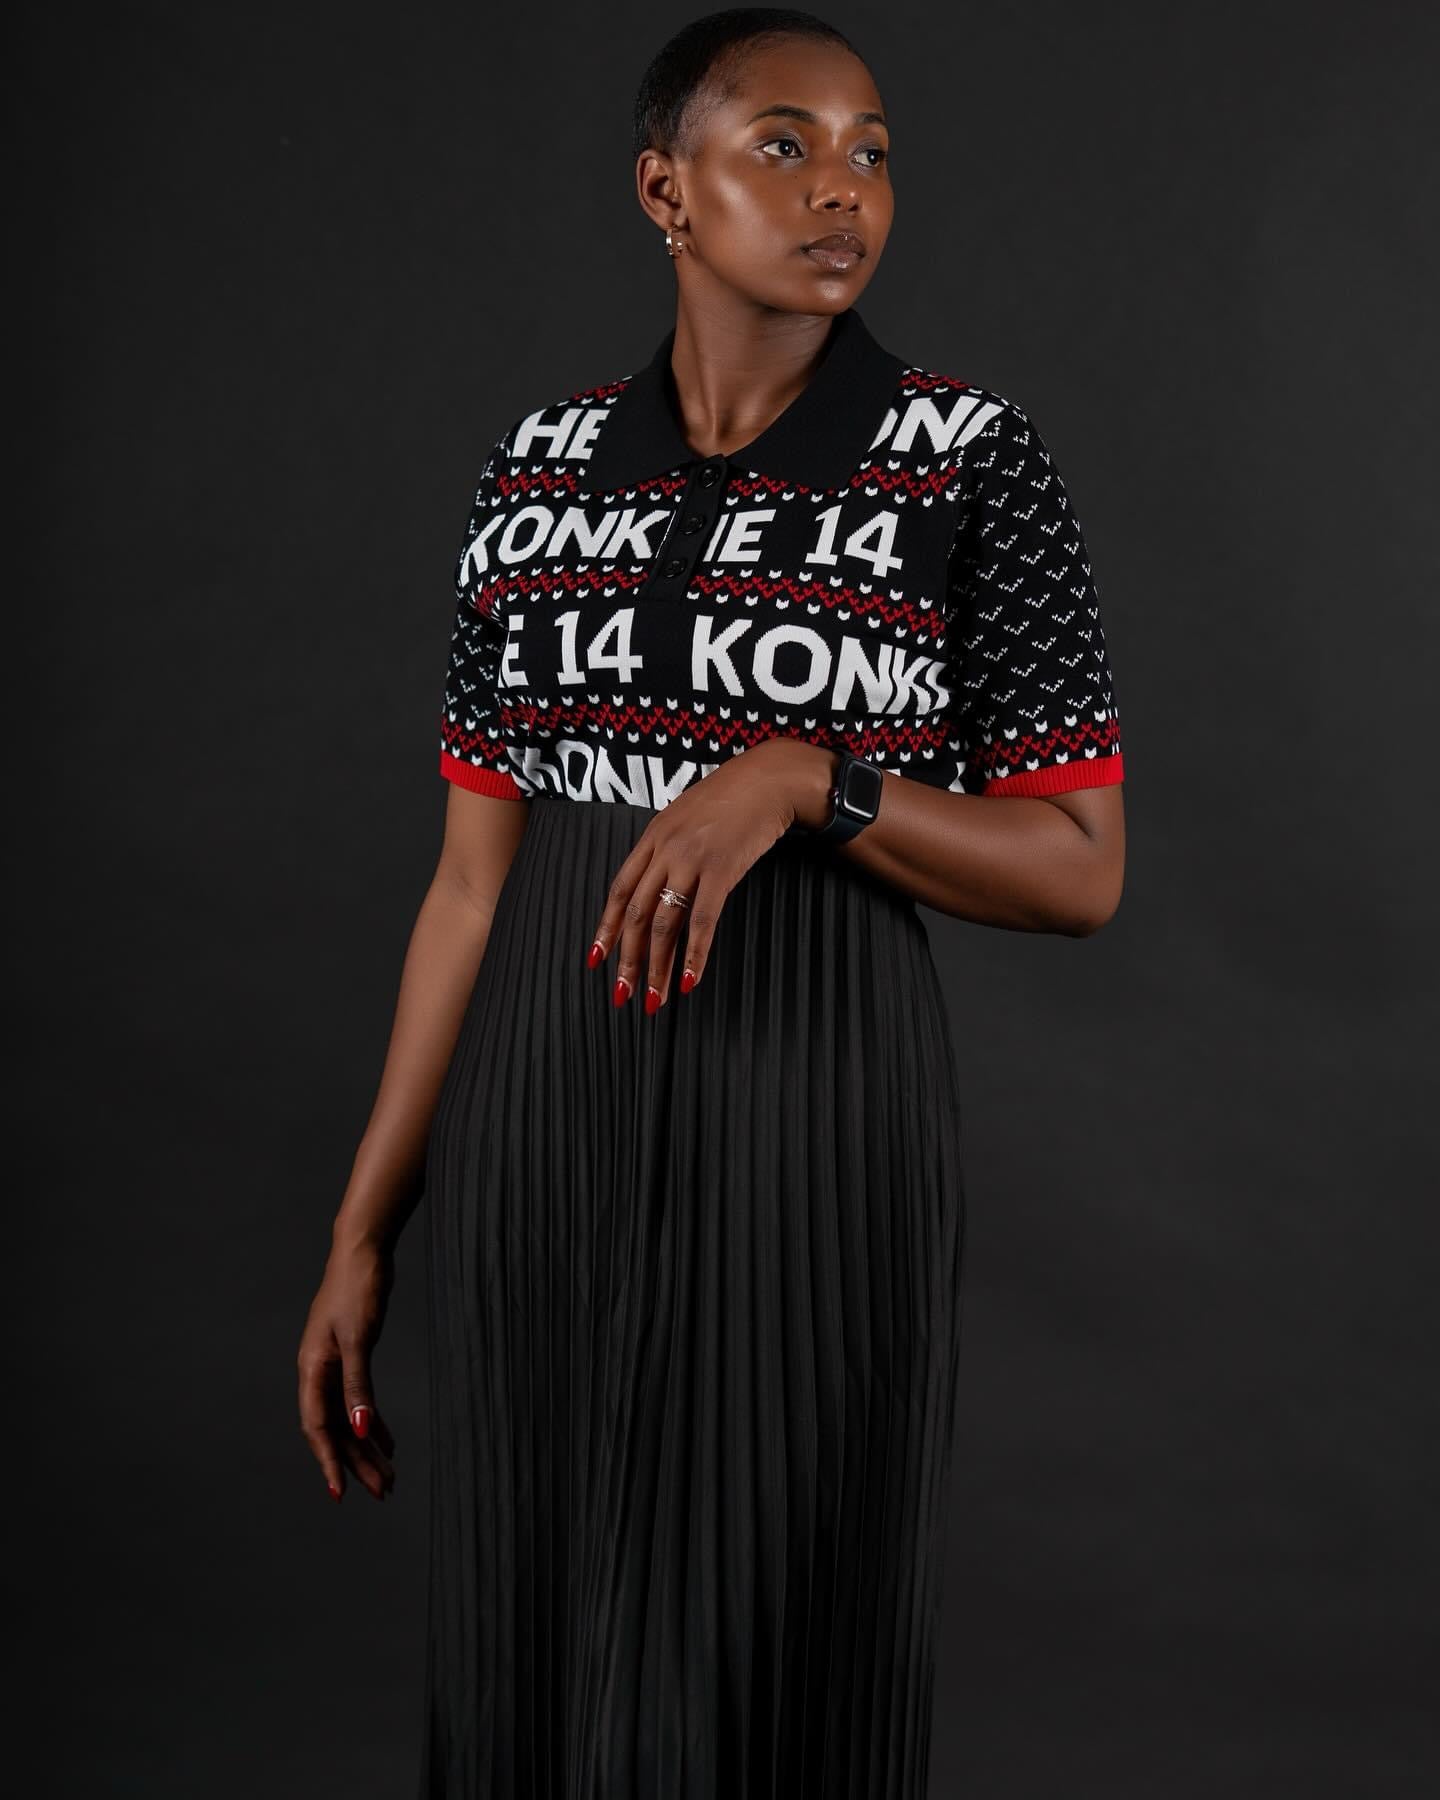 Konkhe 14 High-end knitted Unisex Golfers